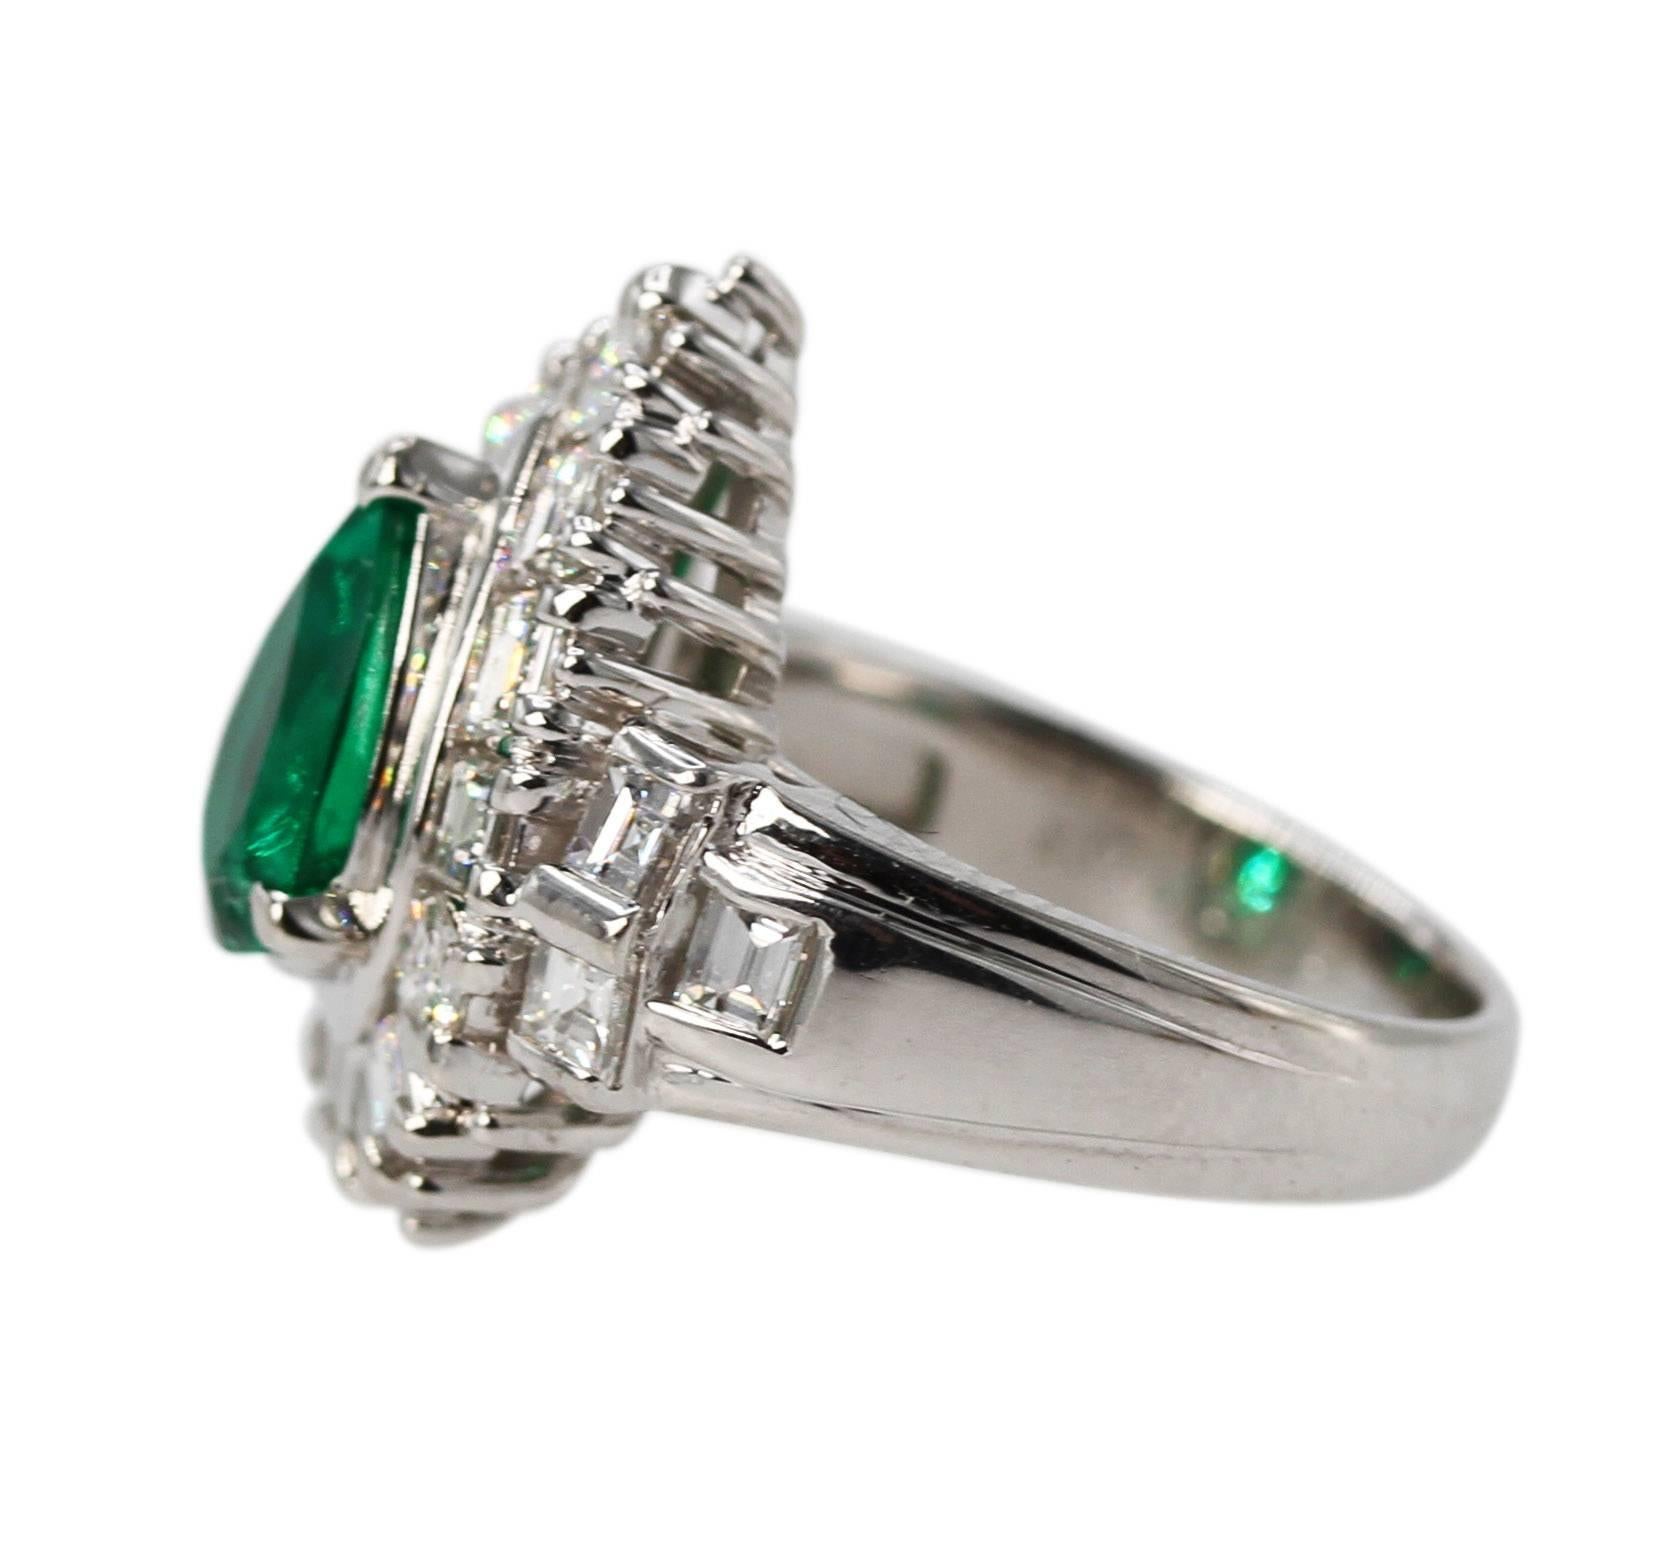 Platinum, Emerald and Diamond Ring
• Stamped PT900, E1.52 and D1.92
• Pear-shaped emerald weighing 1.52 carats 
• Accompanied by GIA gem report stating that the emerald is Columbian origin, F1
• 18 square step cut diamonds 1.92 carats
• Size 6 1/4